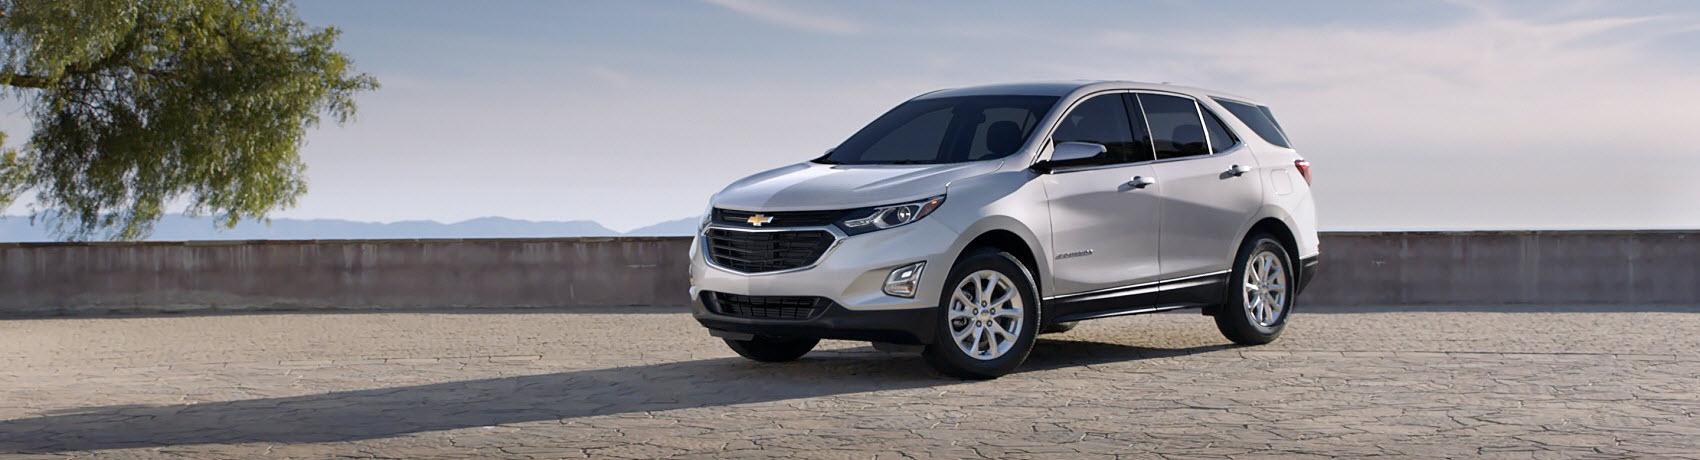 Chevy Traverse Towing Capacity: What to Know - CoPilot